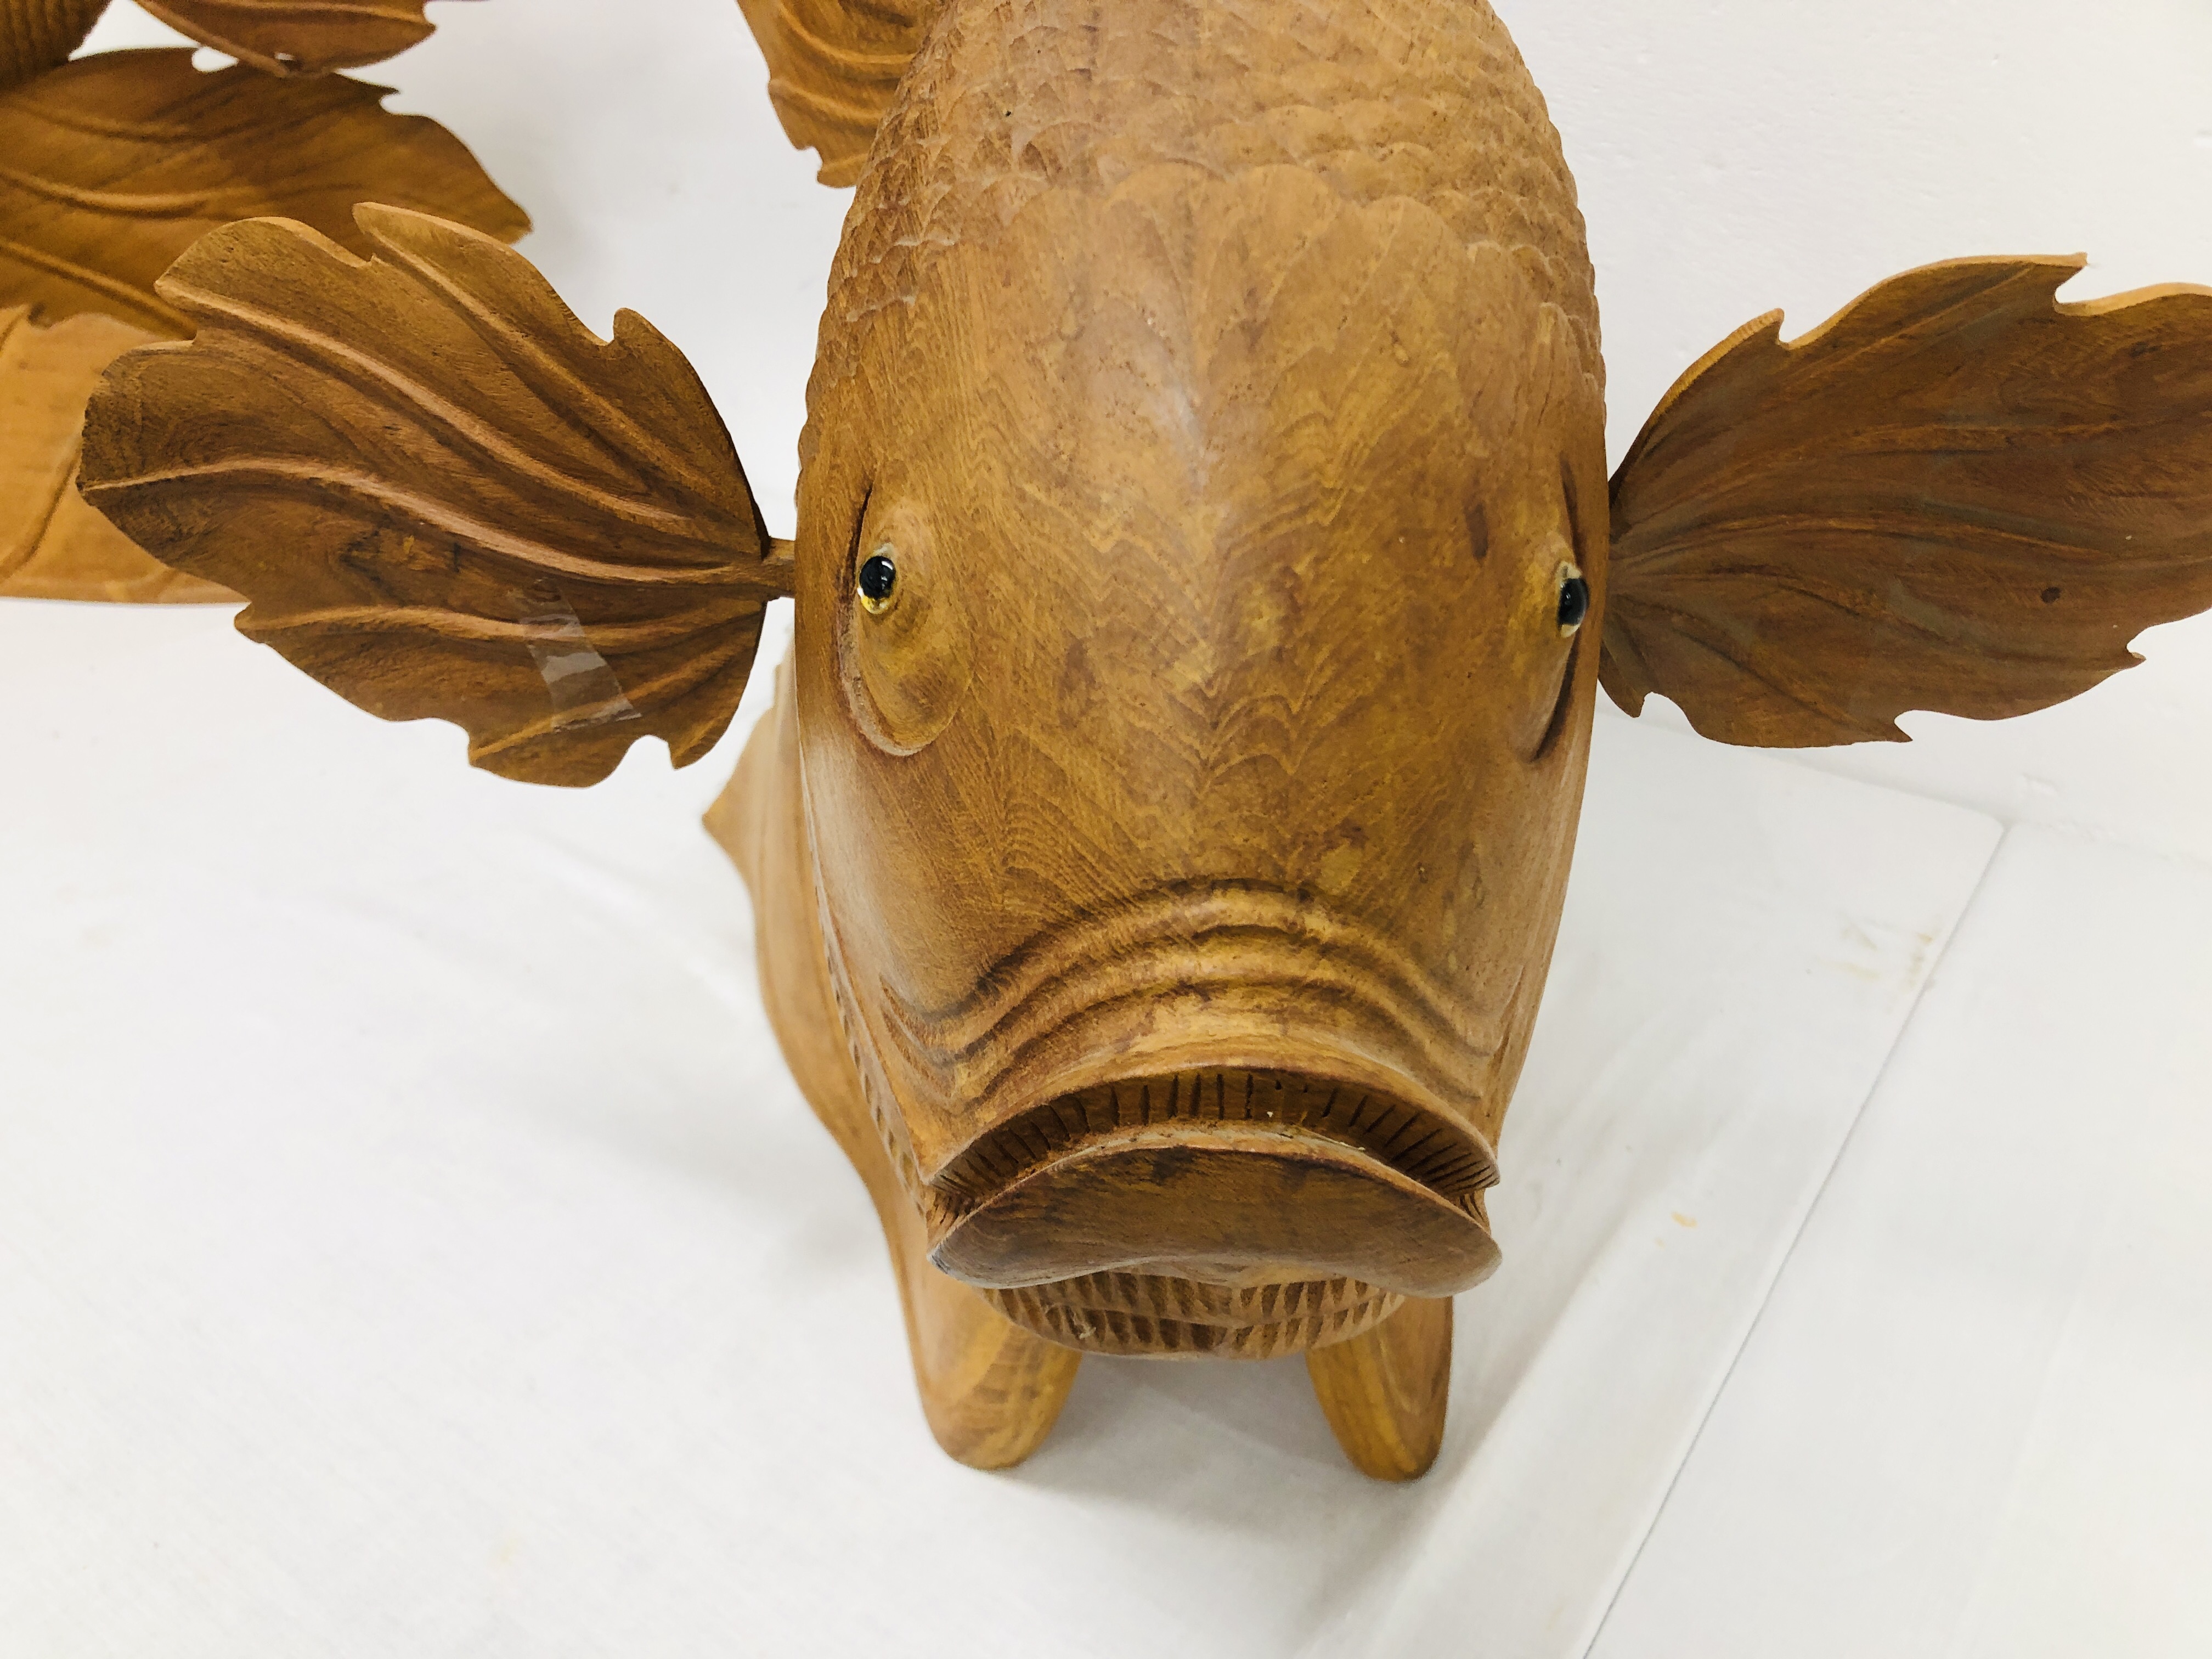 2 X LARGE CARVED TEAK WOOD FISH ORNAMENTS - EACH HEIGHT 58CM. LENGTH 65CM. - Image 7 of 10